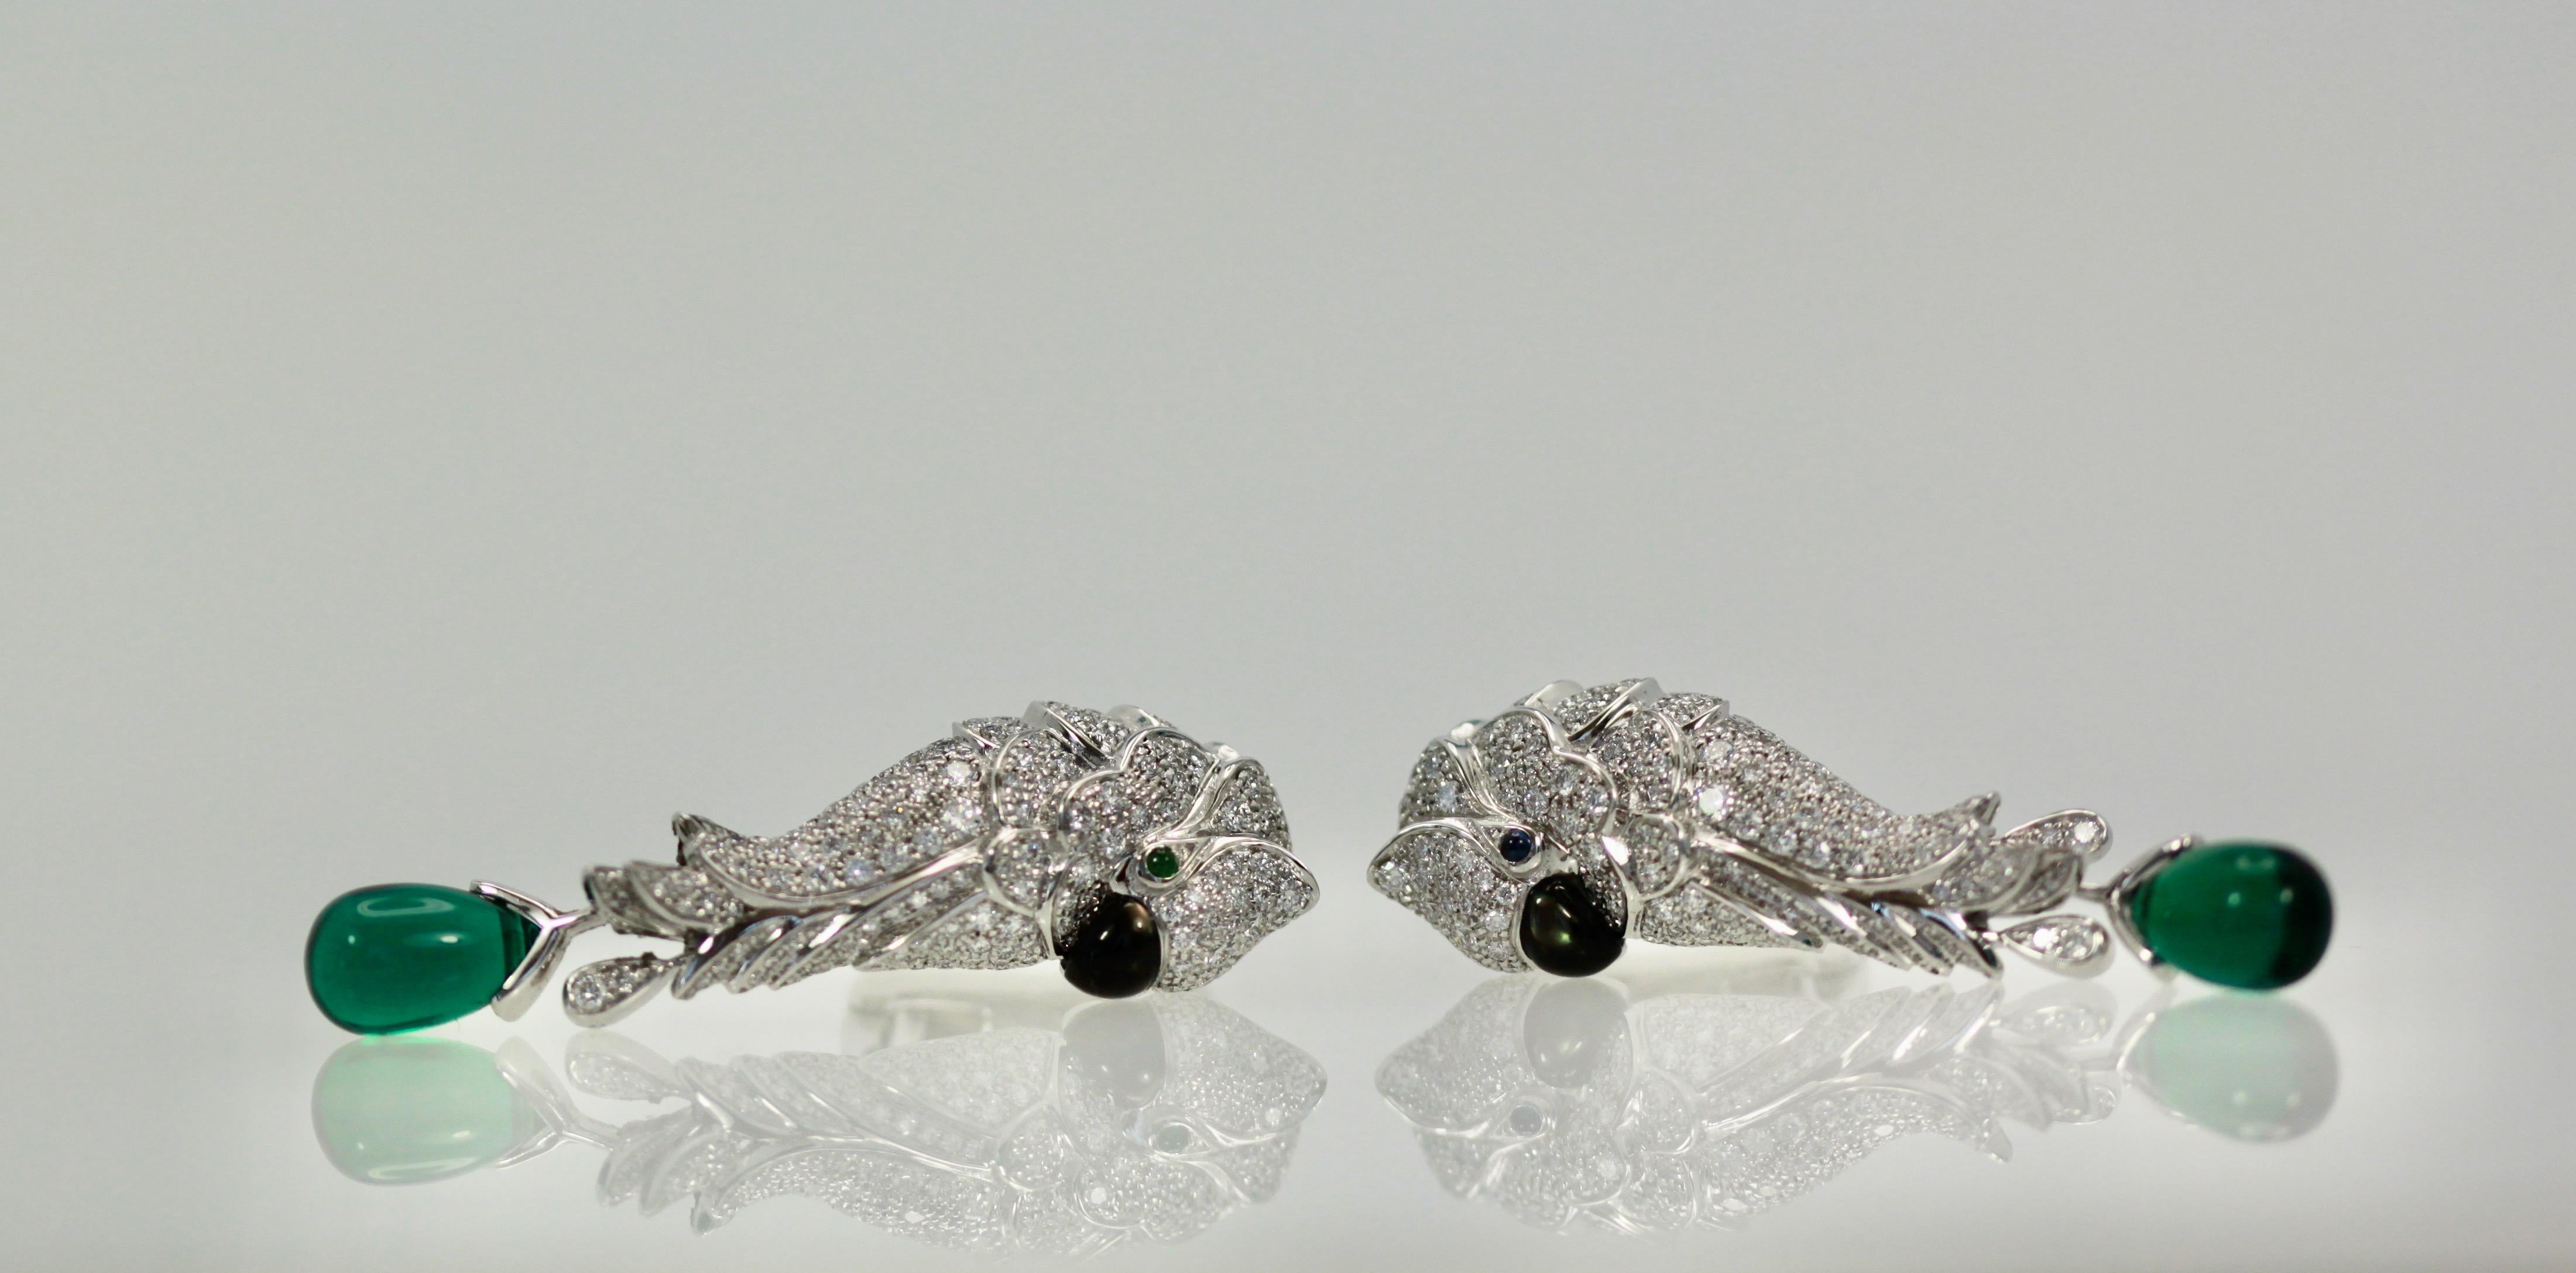 These gorgeous Cartier Earrings are designed as a Parrot all in Diamonds with one Emerald eye, one Sapphire eye an Onyx beak and an Emerald drop.  They measure 40cm in length, 30cm without Emerald drop.  There are 186 Brilliant round Diamonds F-G,